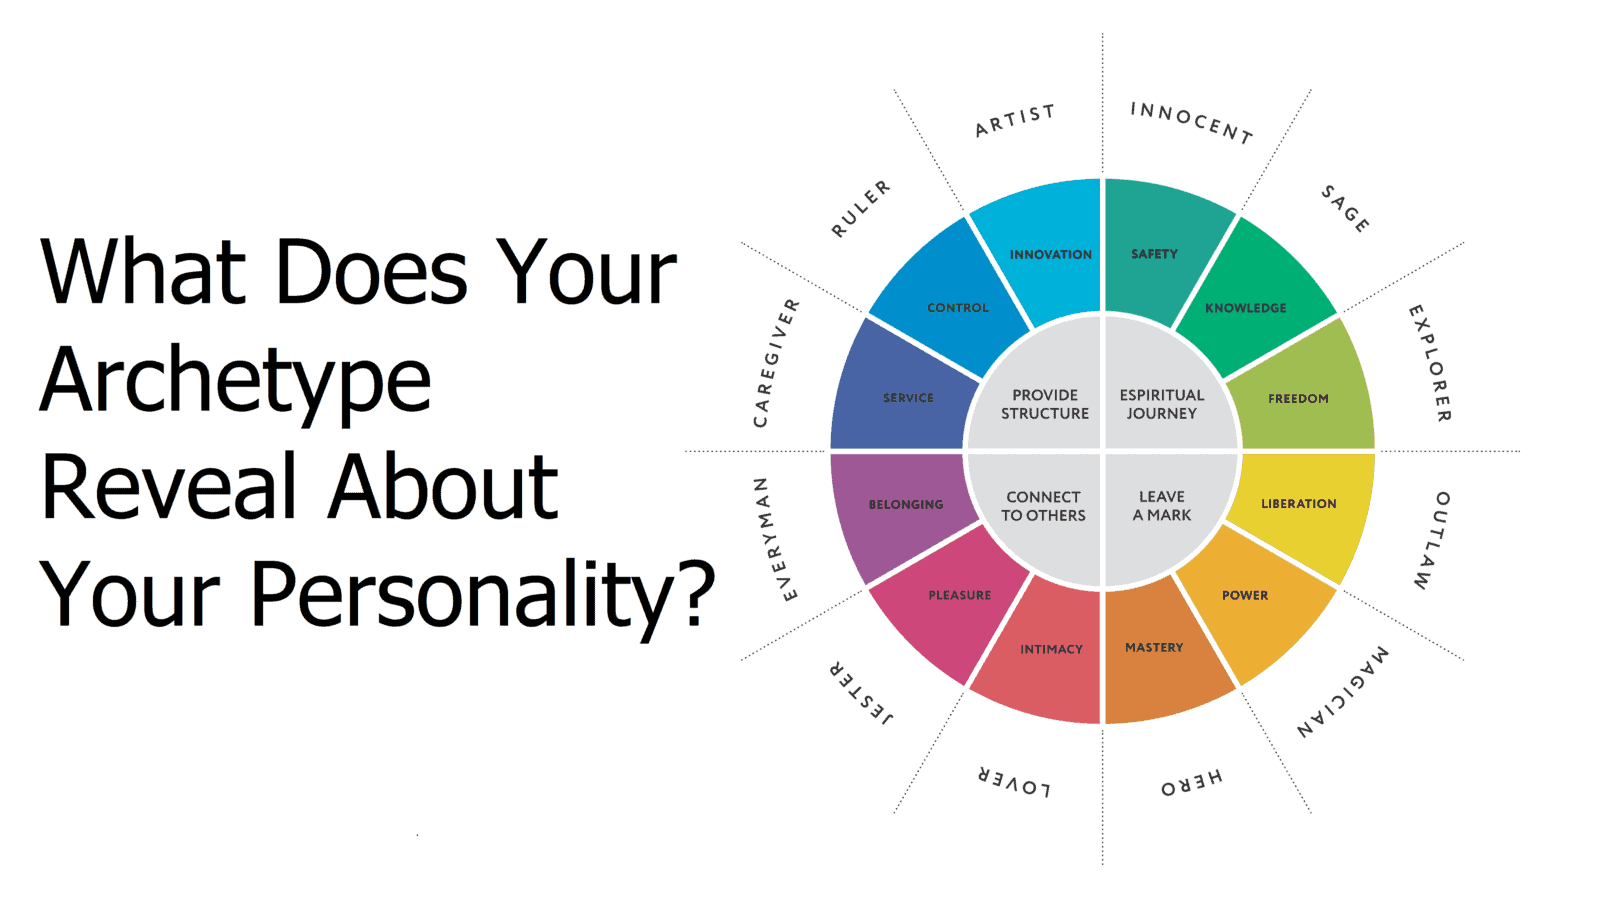 What Does Your Archetype Reveal About Your Personality?